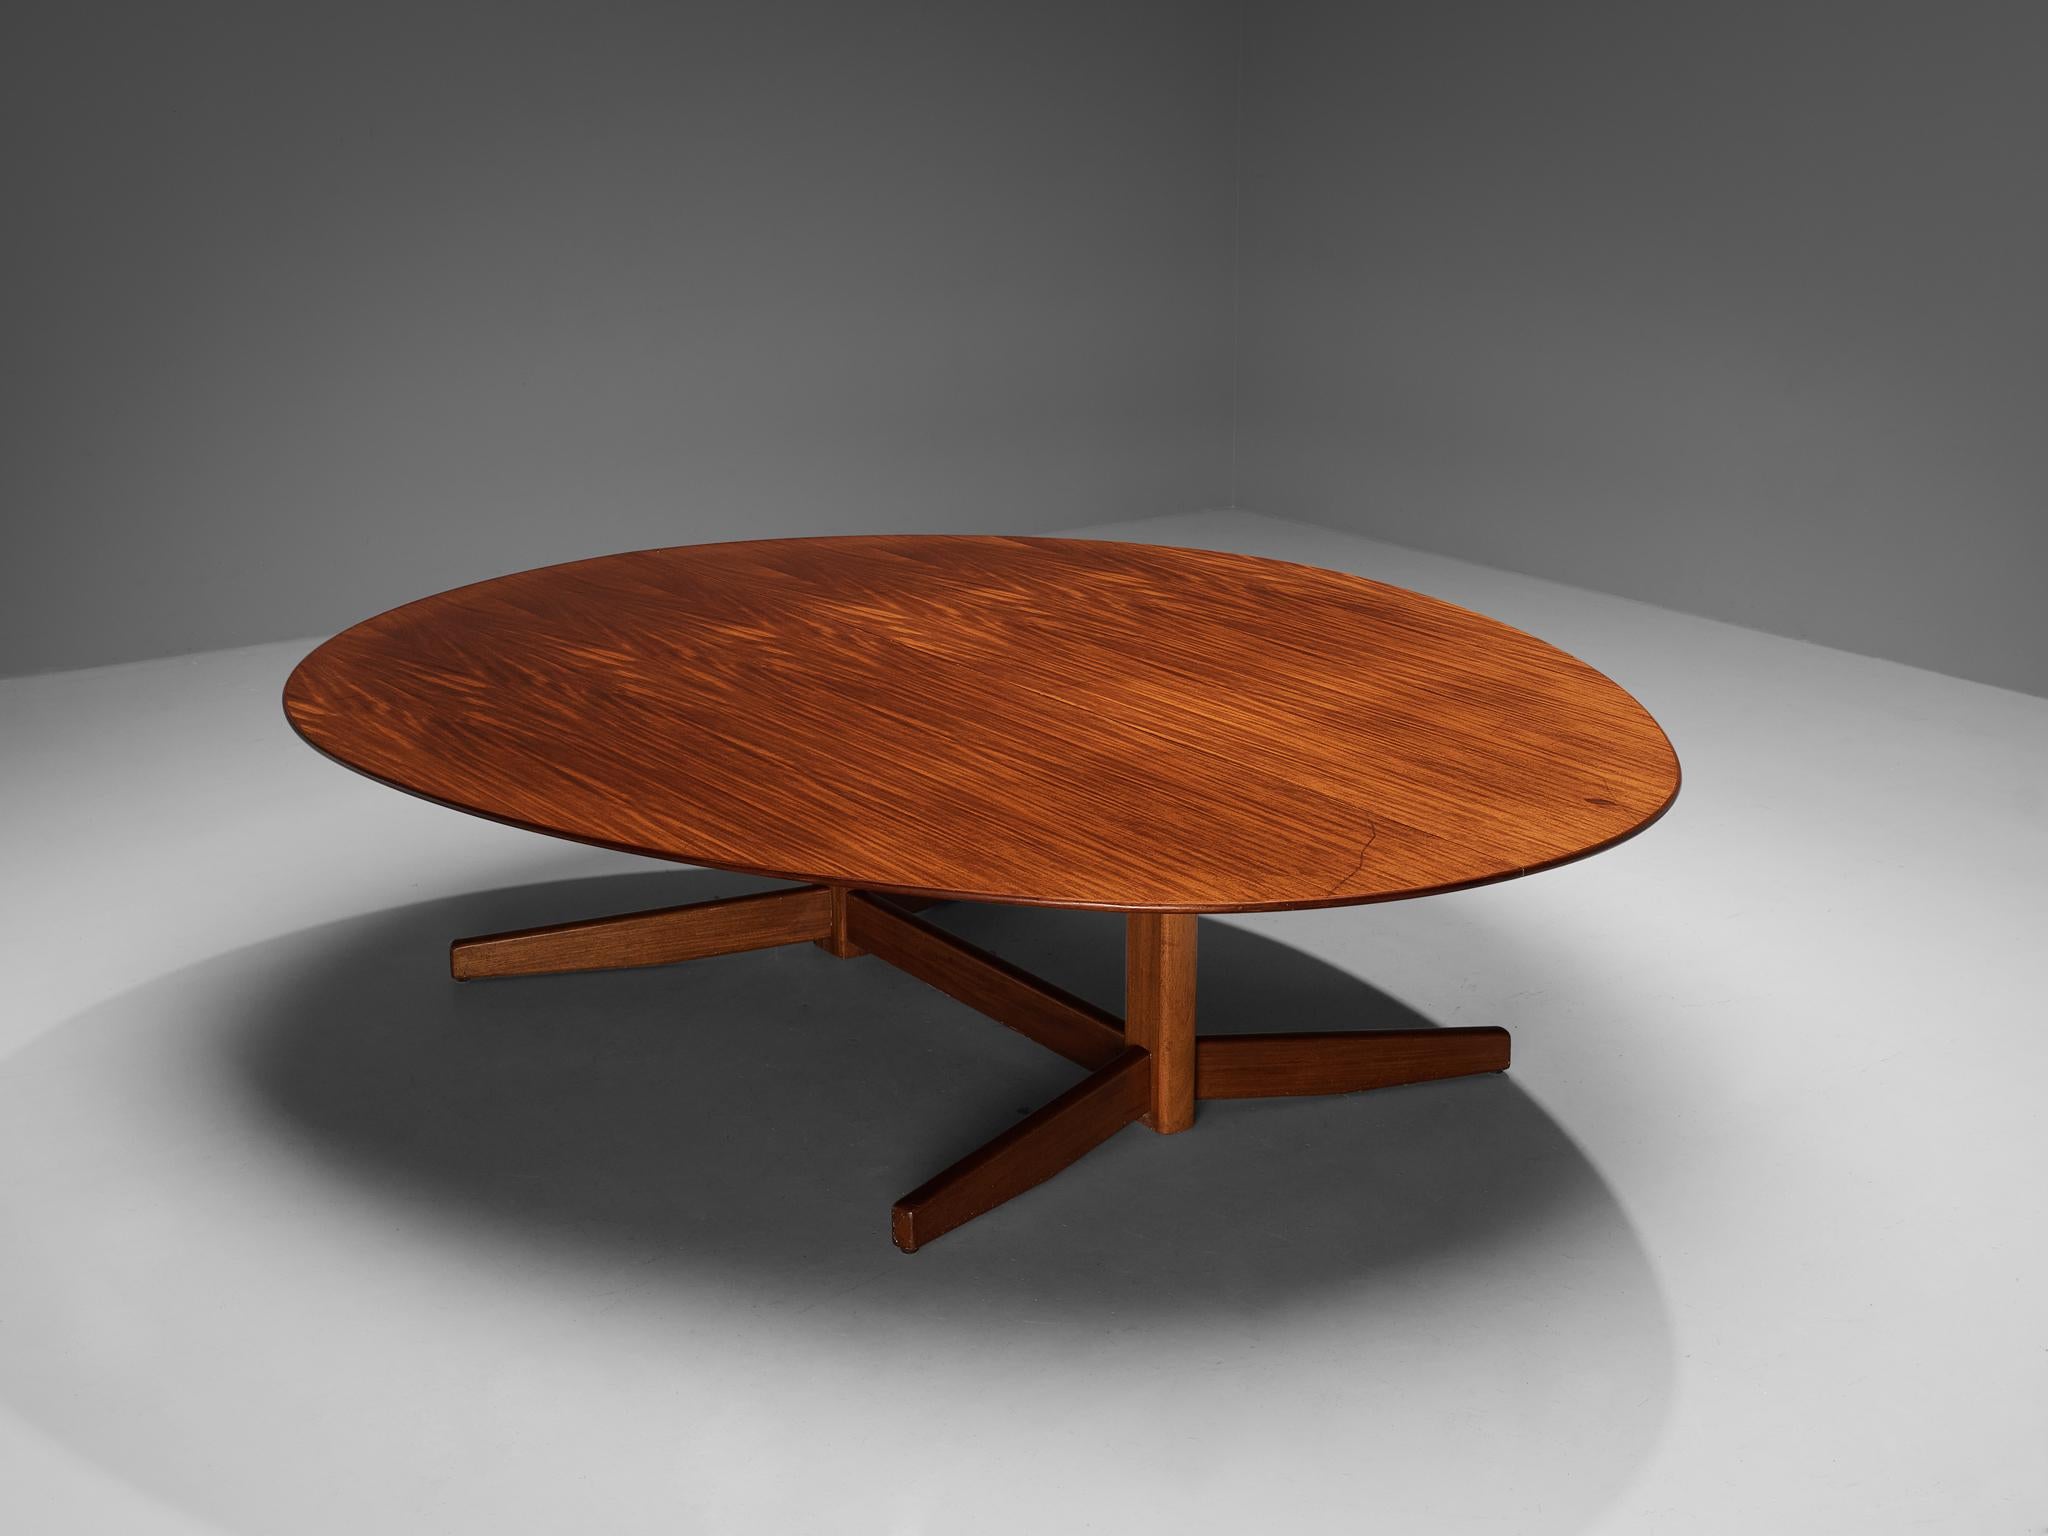 Large dining or conference table, mahogany, Denmark, 1970s

Beautifully large dining table in an oval or egg shape, made in Denmark in the 1970s. This table is executed in mahogany that is in radiating shape and has amazing detailing within the